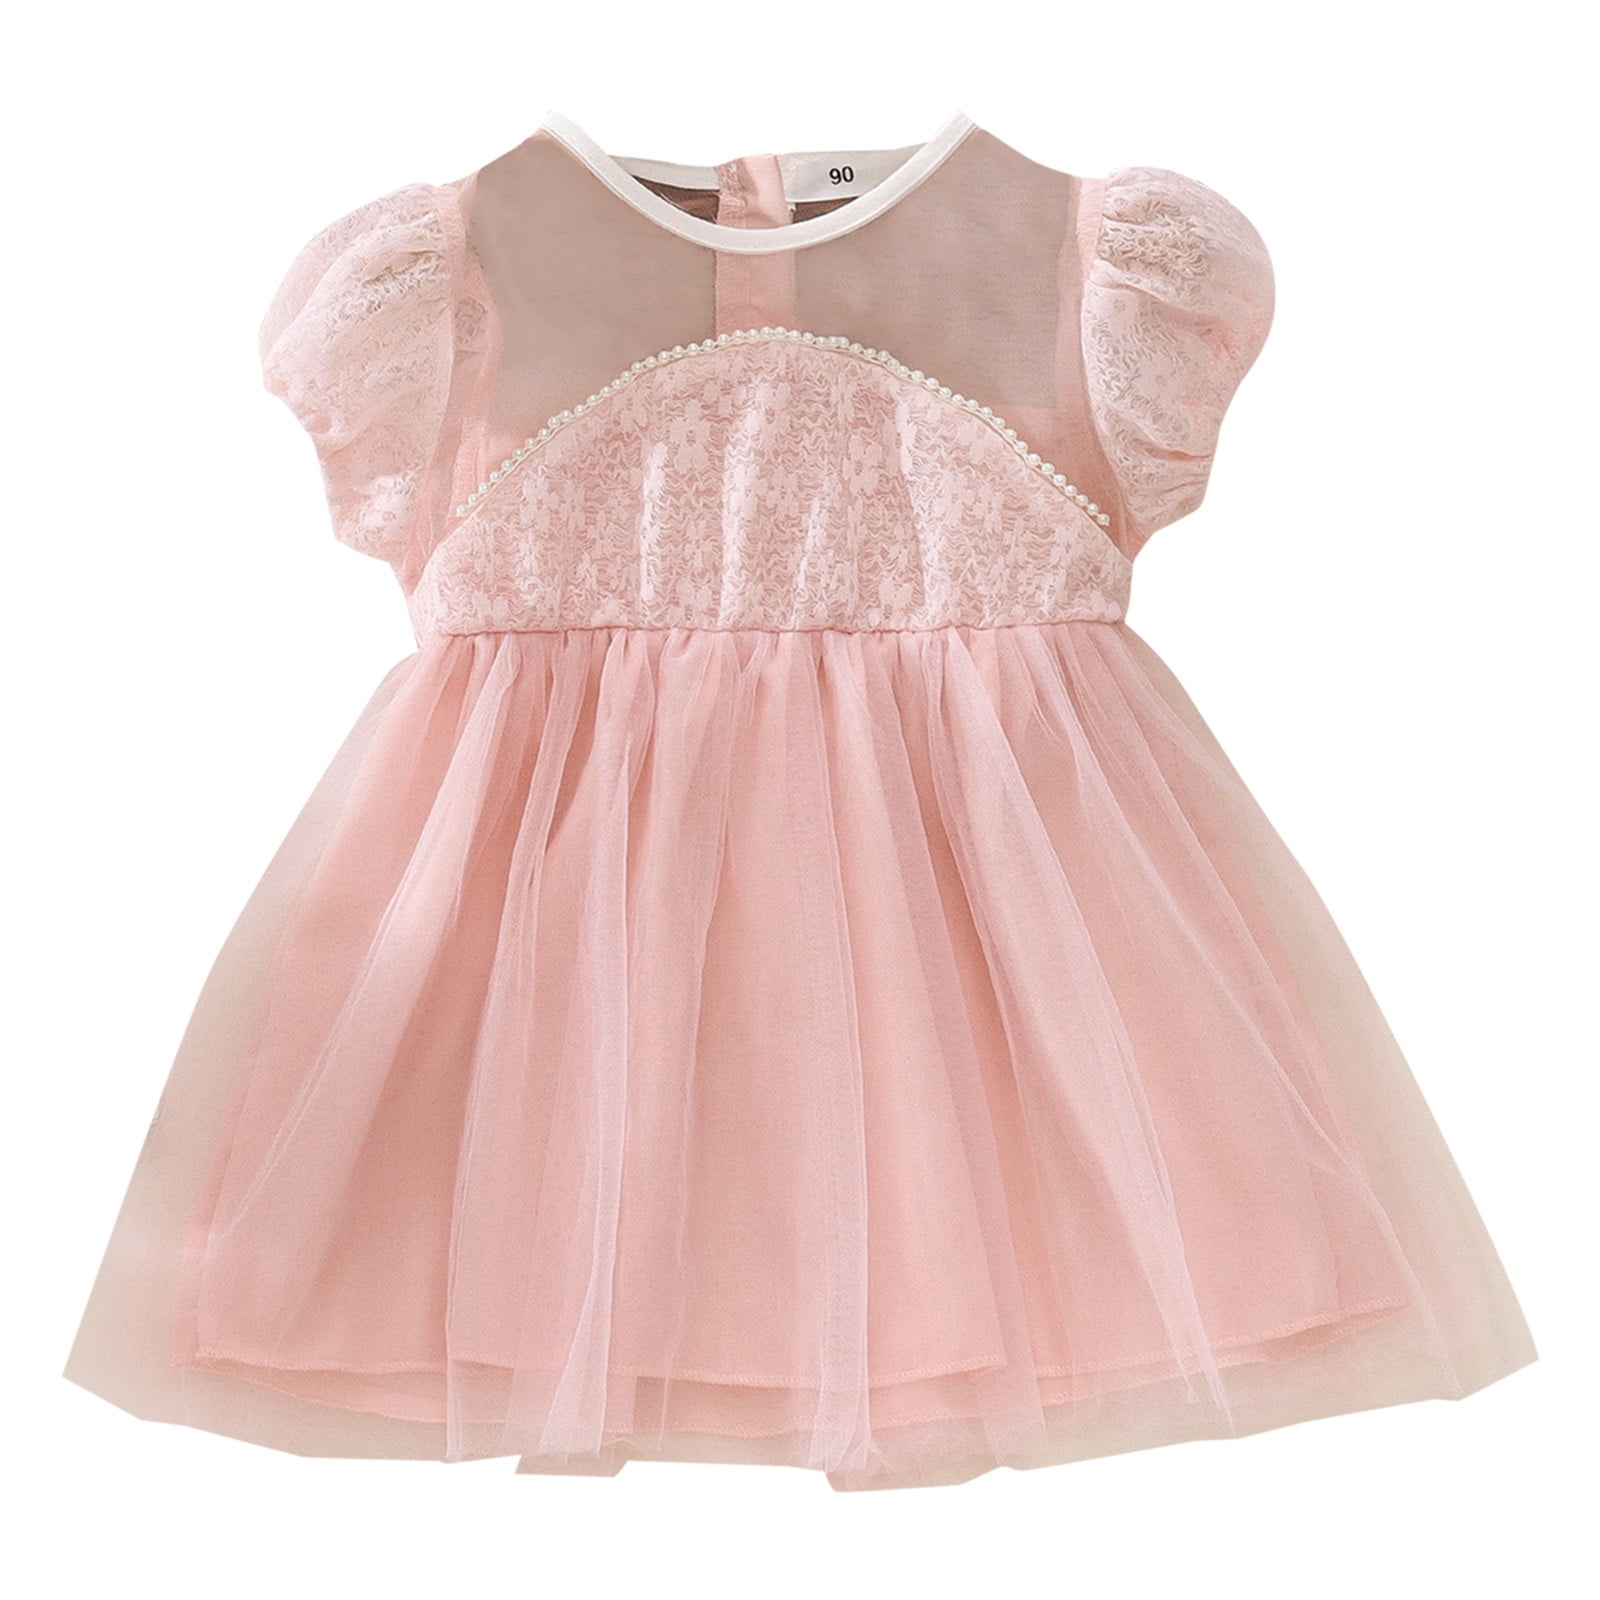 Dresses For Girls Dance Kids Summer Ball Gown Draped Pleat Lace Tiered ...